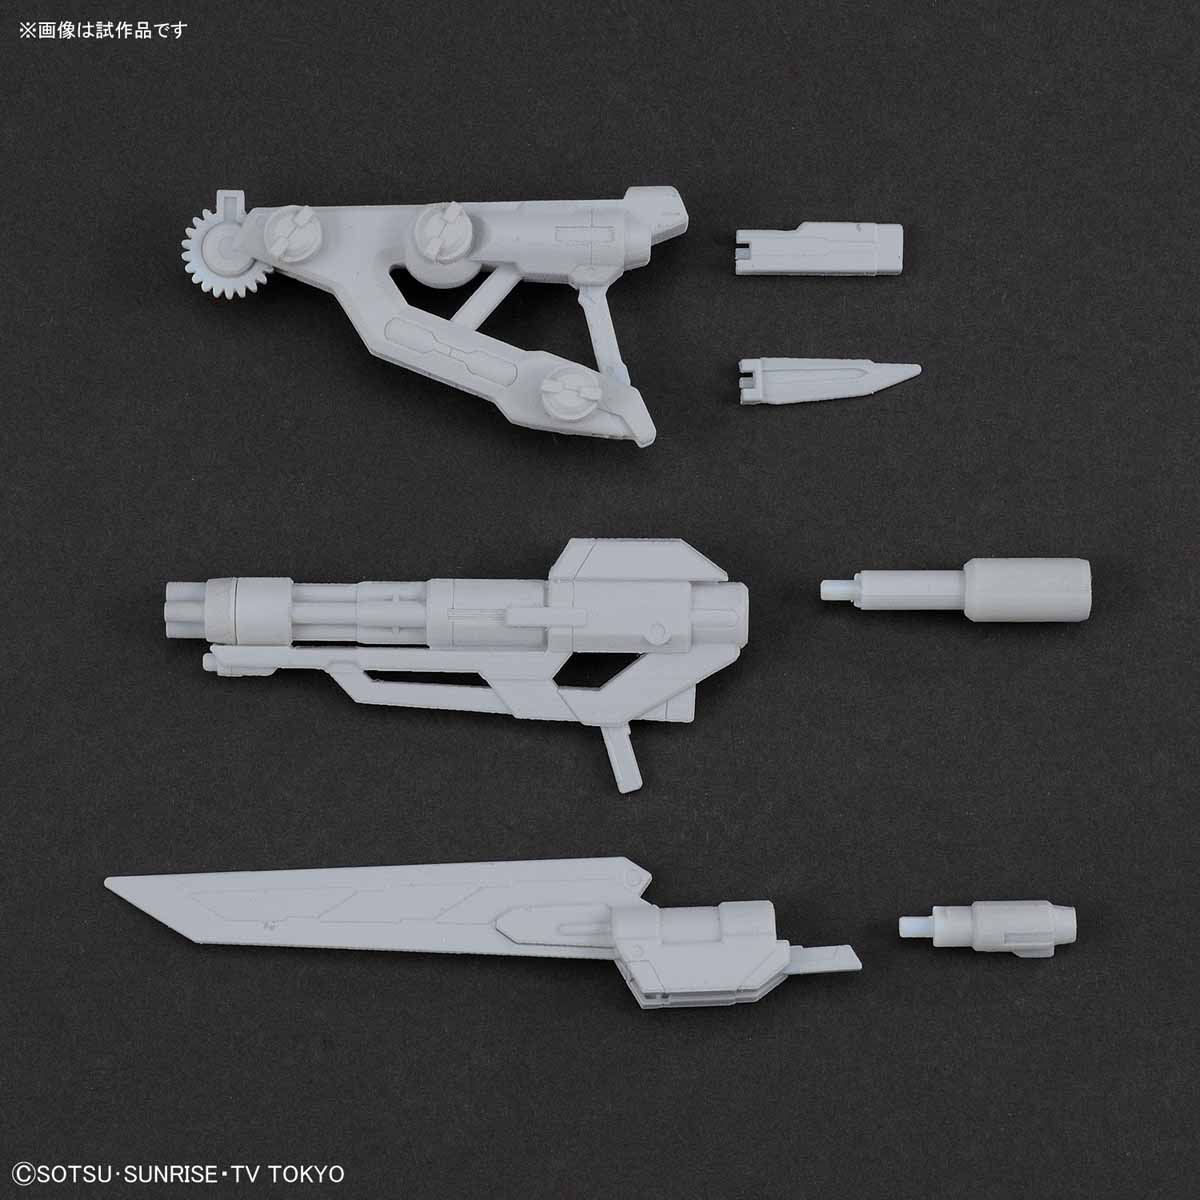 HGBC 1/144 Spinning Blaster - Release Info - Gundam Kits Collection News and Reviews